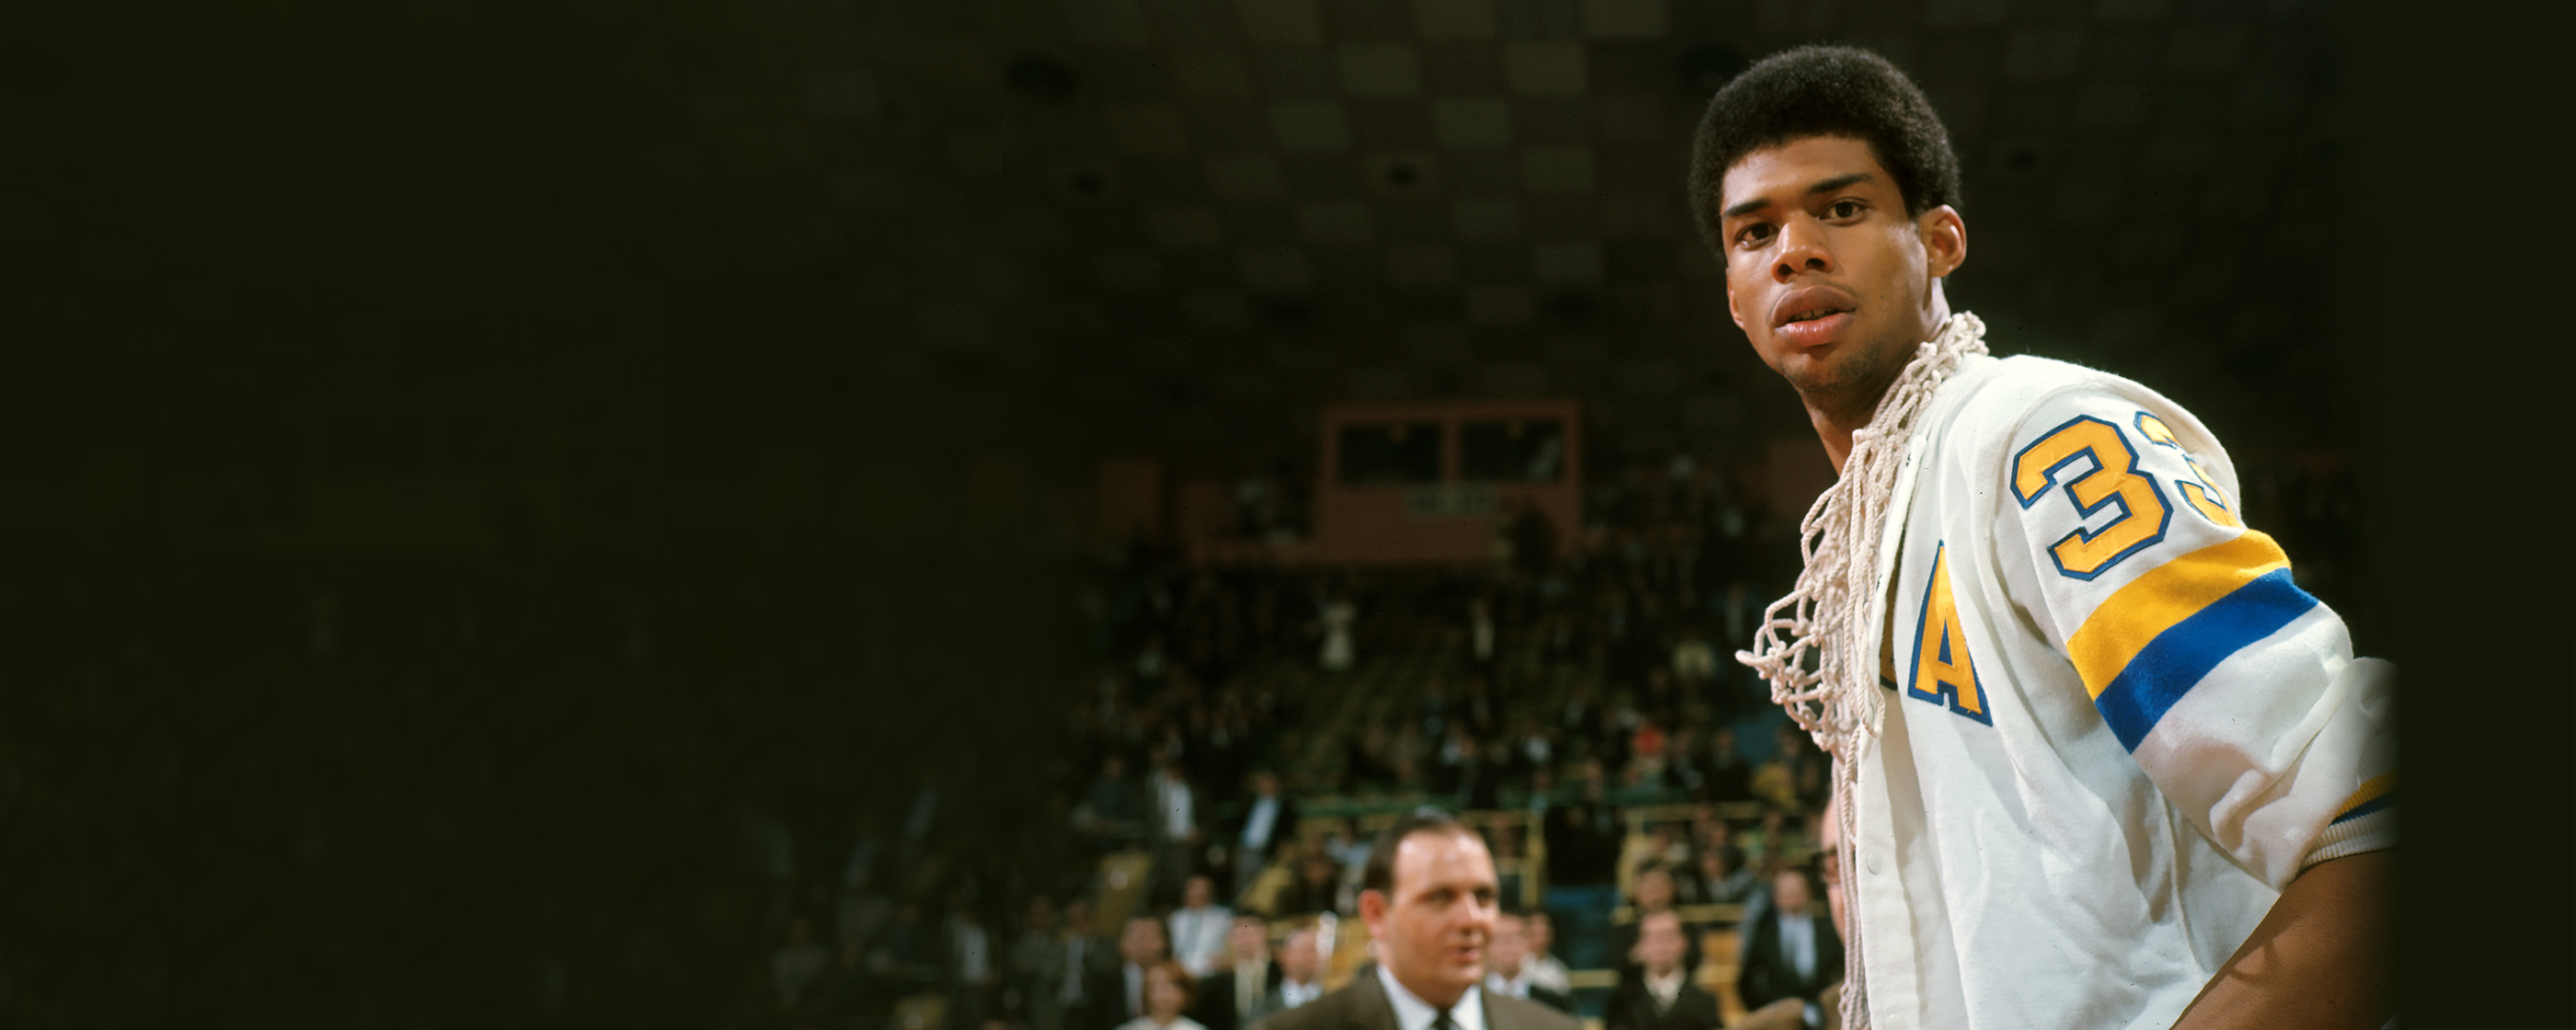 What If The Knicks Traded For Harlem's Kareem Abdul-Jabbar In 1975?